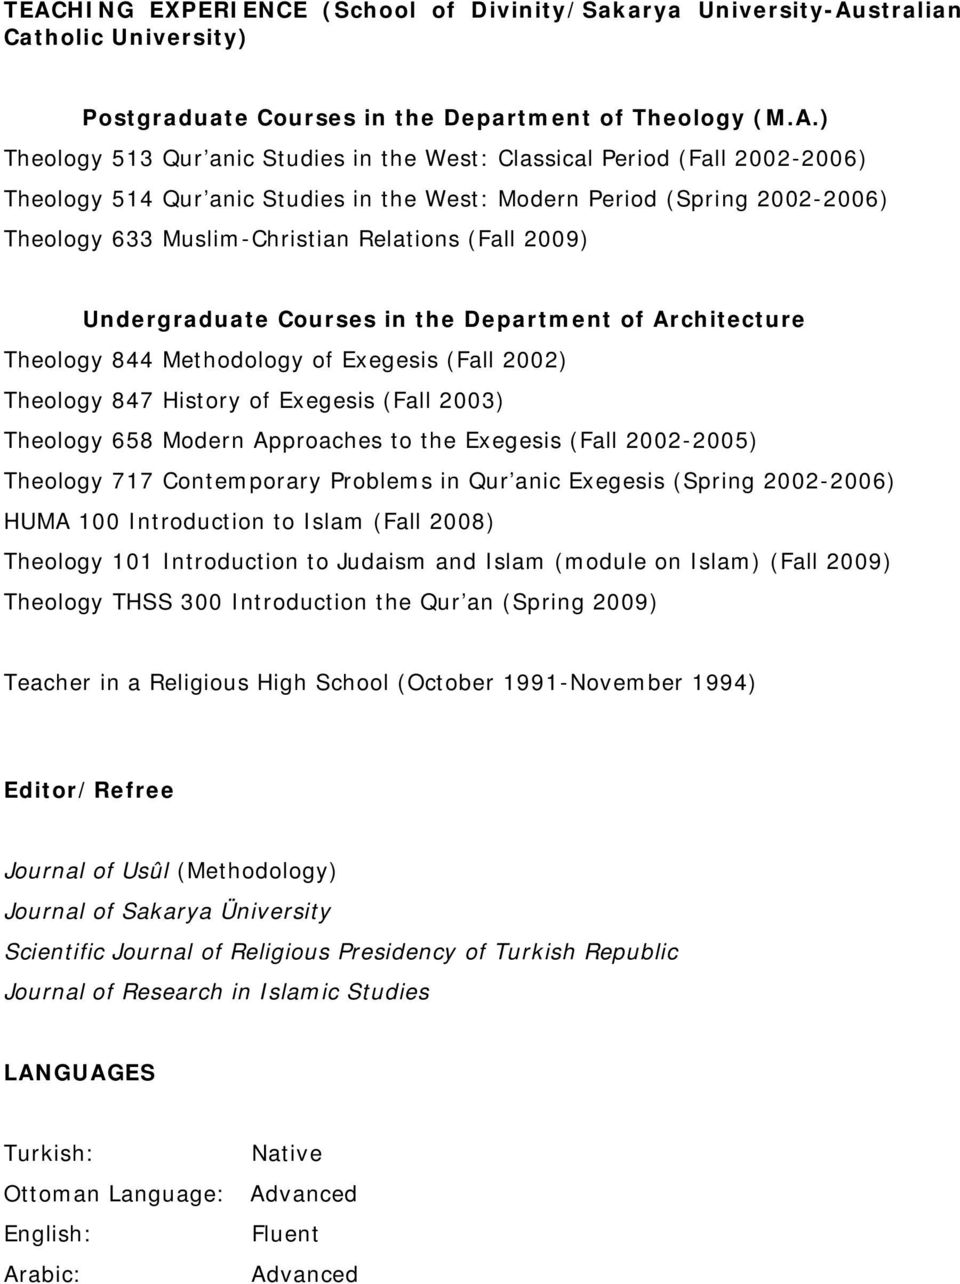 Department of Architecture Theology 844 Methodology of Exegesis (Fall 2002) Theology 847 History of Exegesis (Fall 2003) Theology 658 Modern Approaches to the Exegesis (Fall 2002-2005) Theology 717